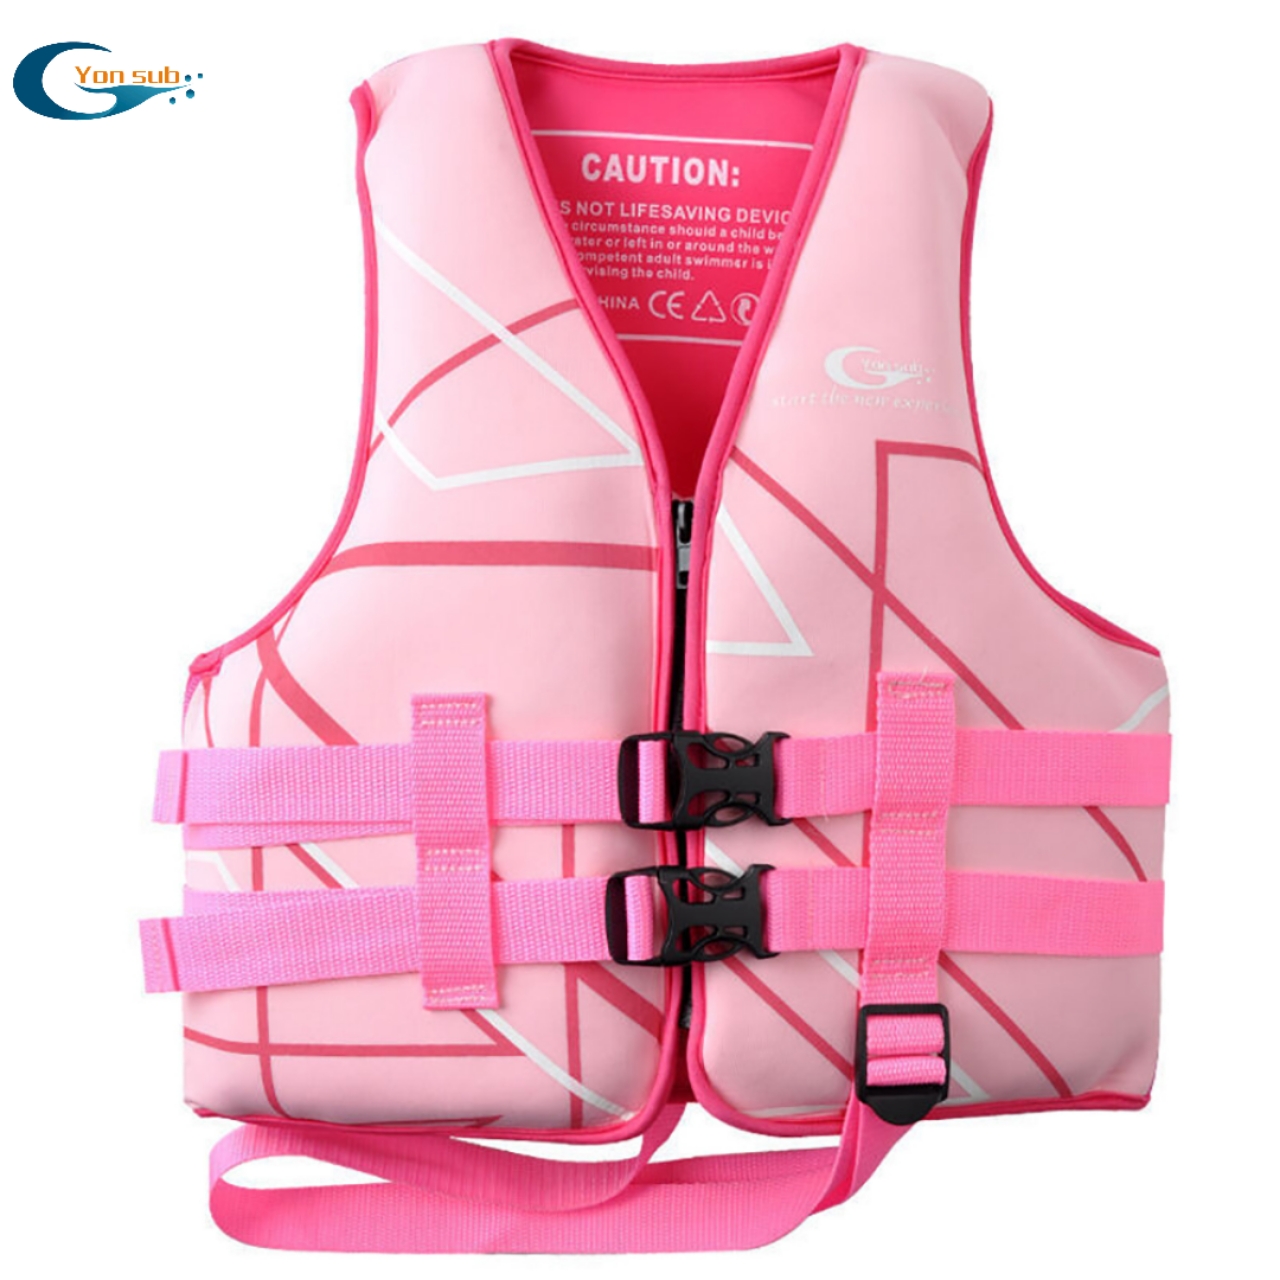 Neoprene Life Jacket With High Buoyancy For Age 3-7 Children